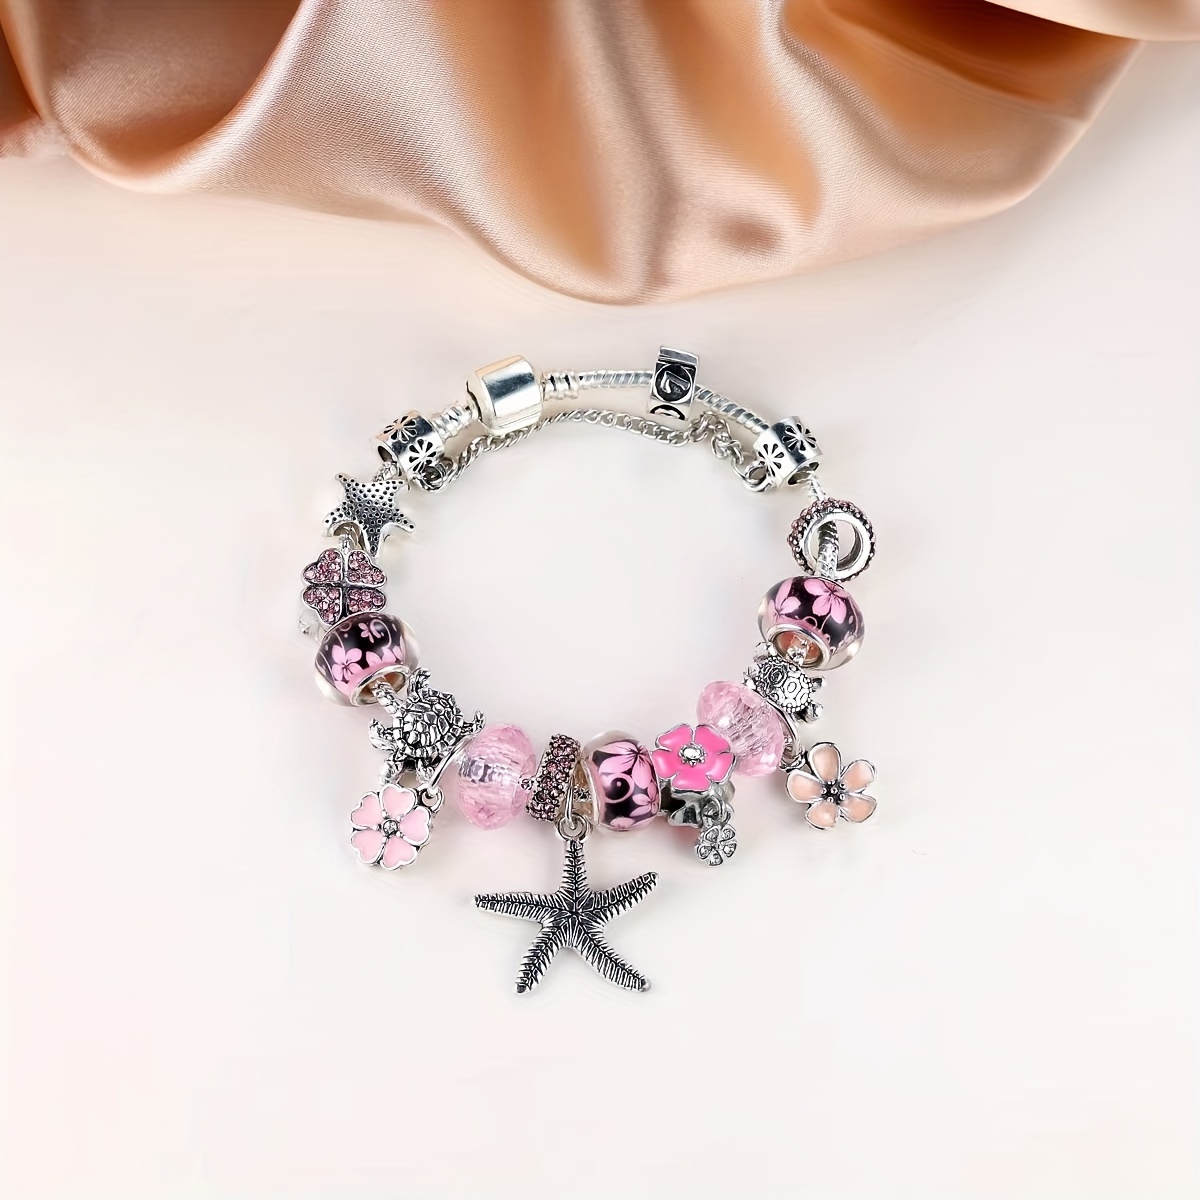 

Stylish Charm Bracelet For Women, 1pc Fashion Beaded With Star, Clover, Turtle, Floral & Starfish Pendants, Chic Daily Wear Accessory